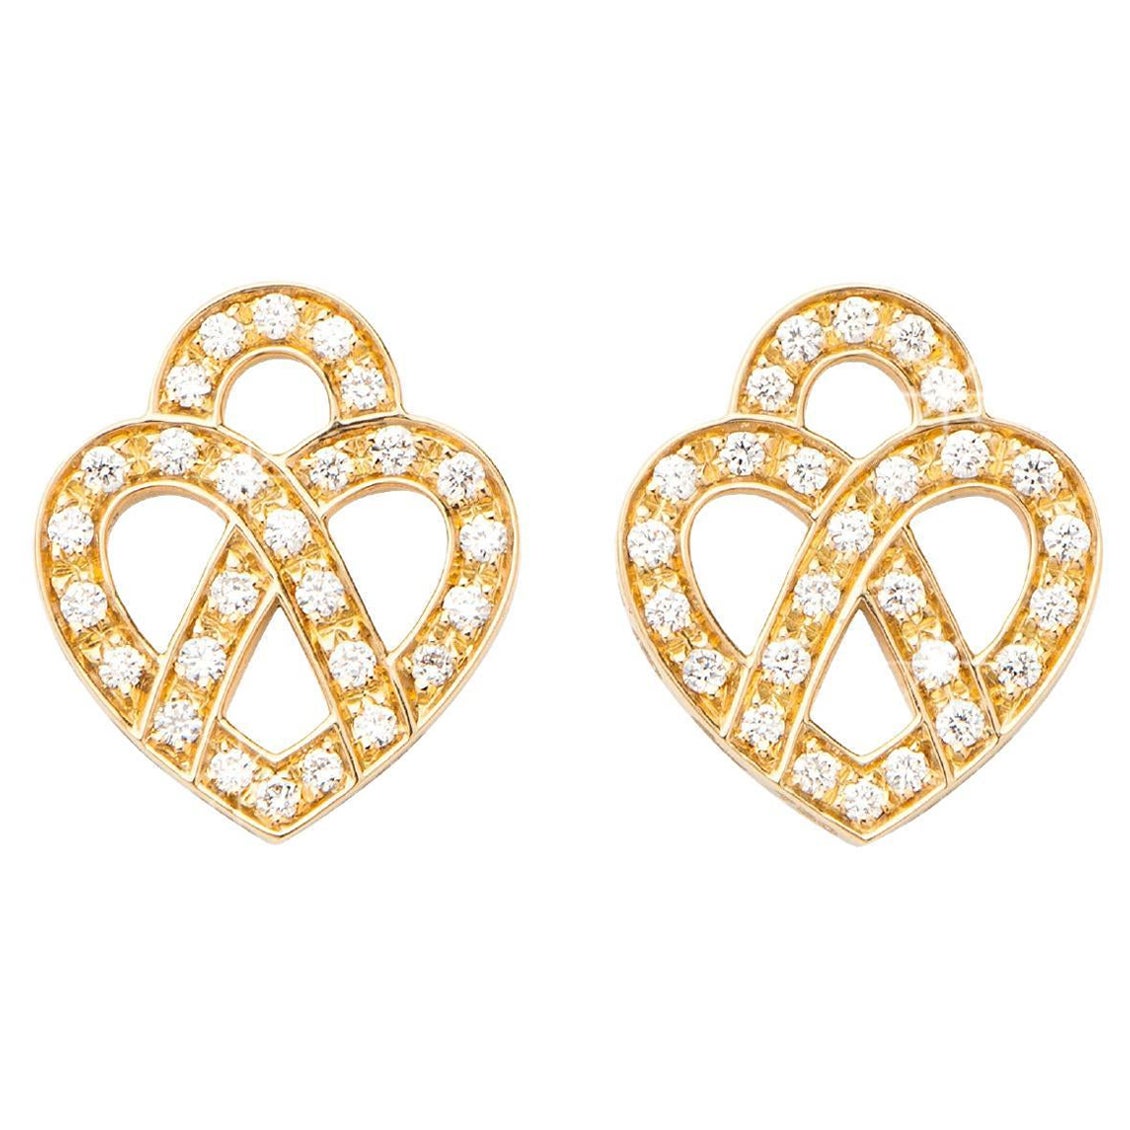 18 Carat Gold and Diamonds Earrings, Yellow Gold, Cœur Entrelacé Collection For Sale